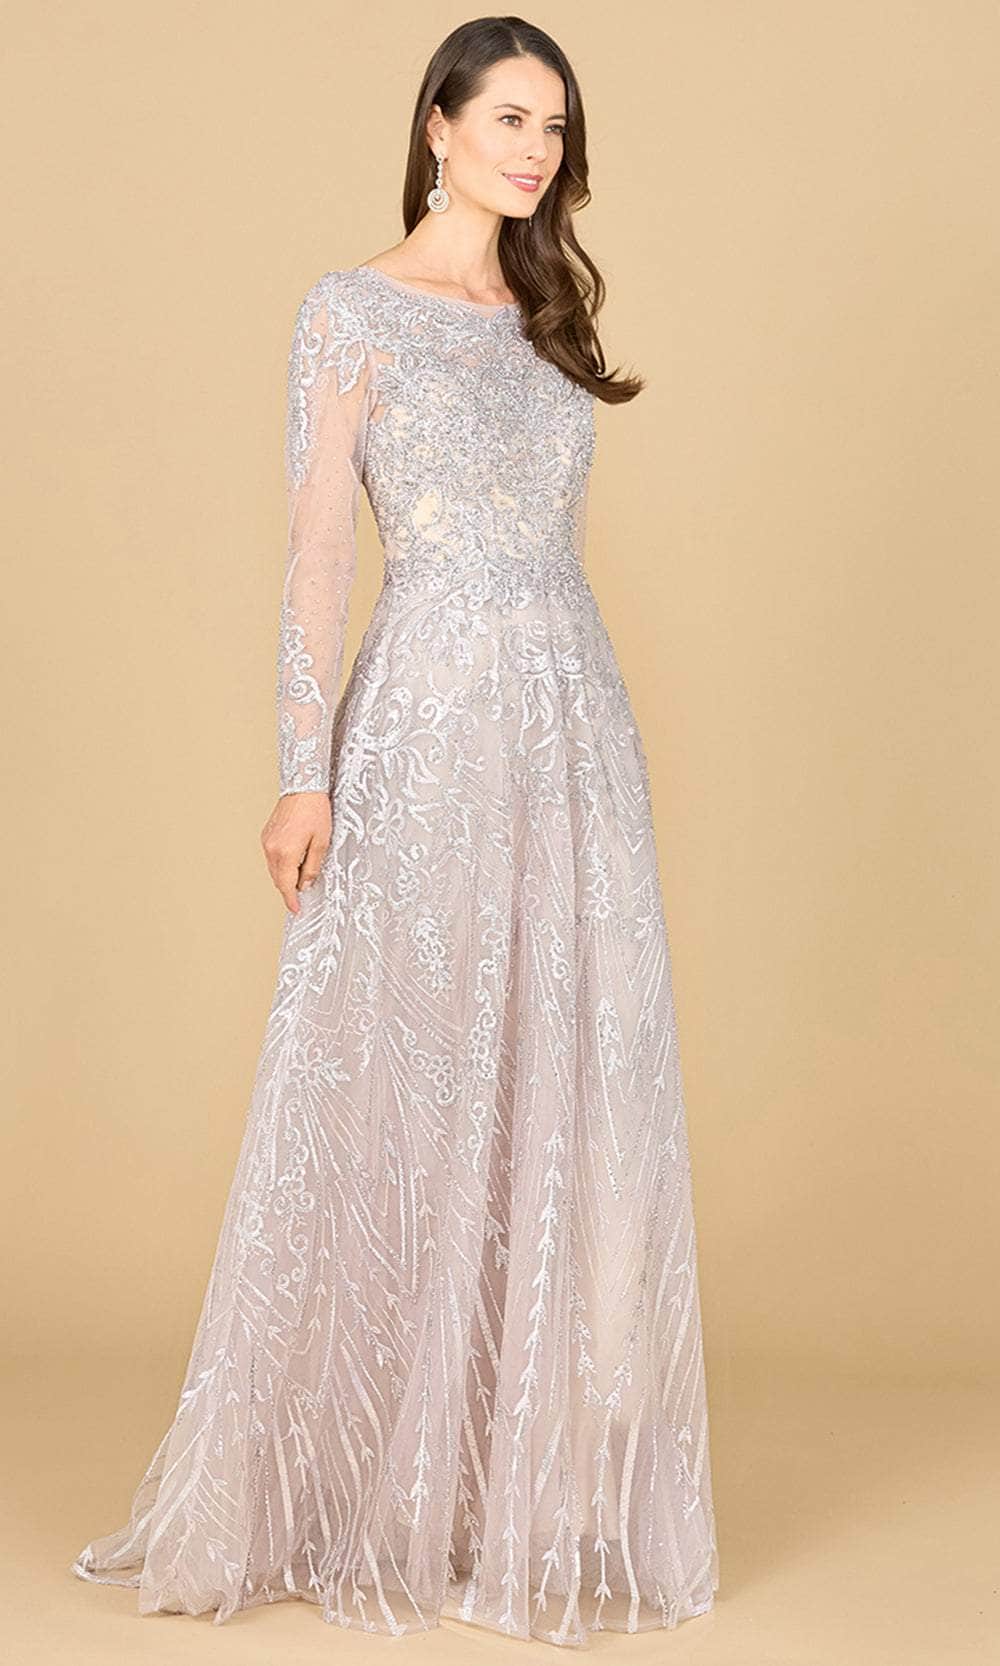 Image of Lara Dresses 29154 - Illusion Lace Embroidered Gown